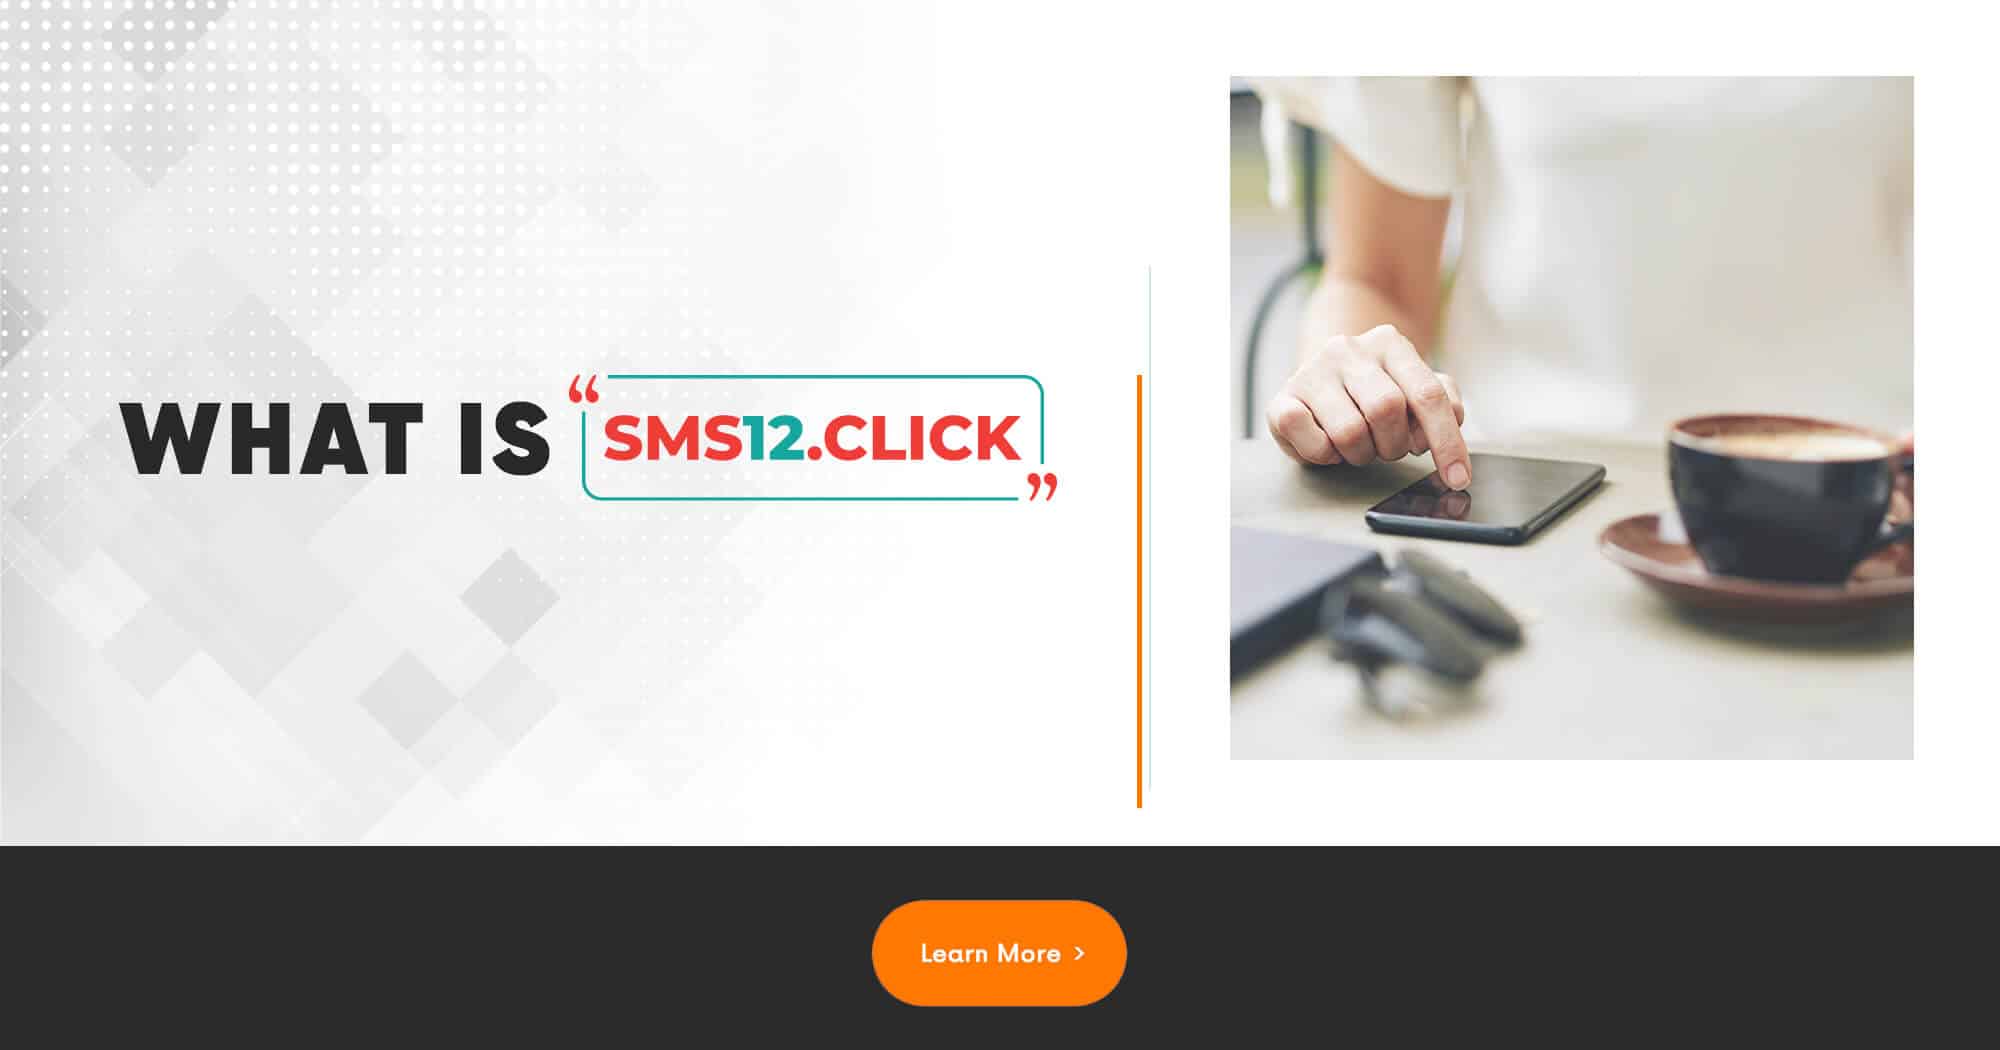 What is SMS12.click